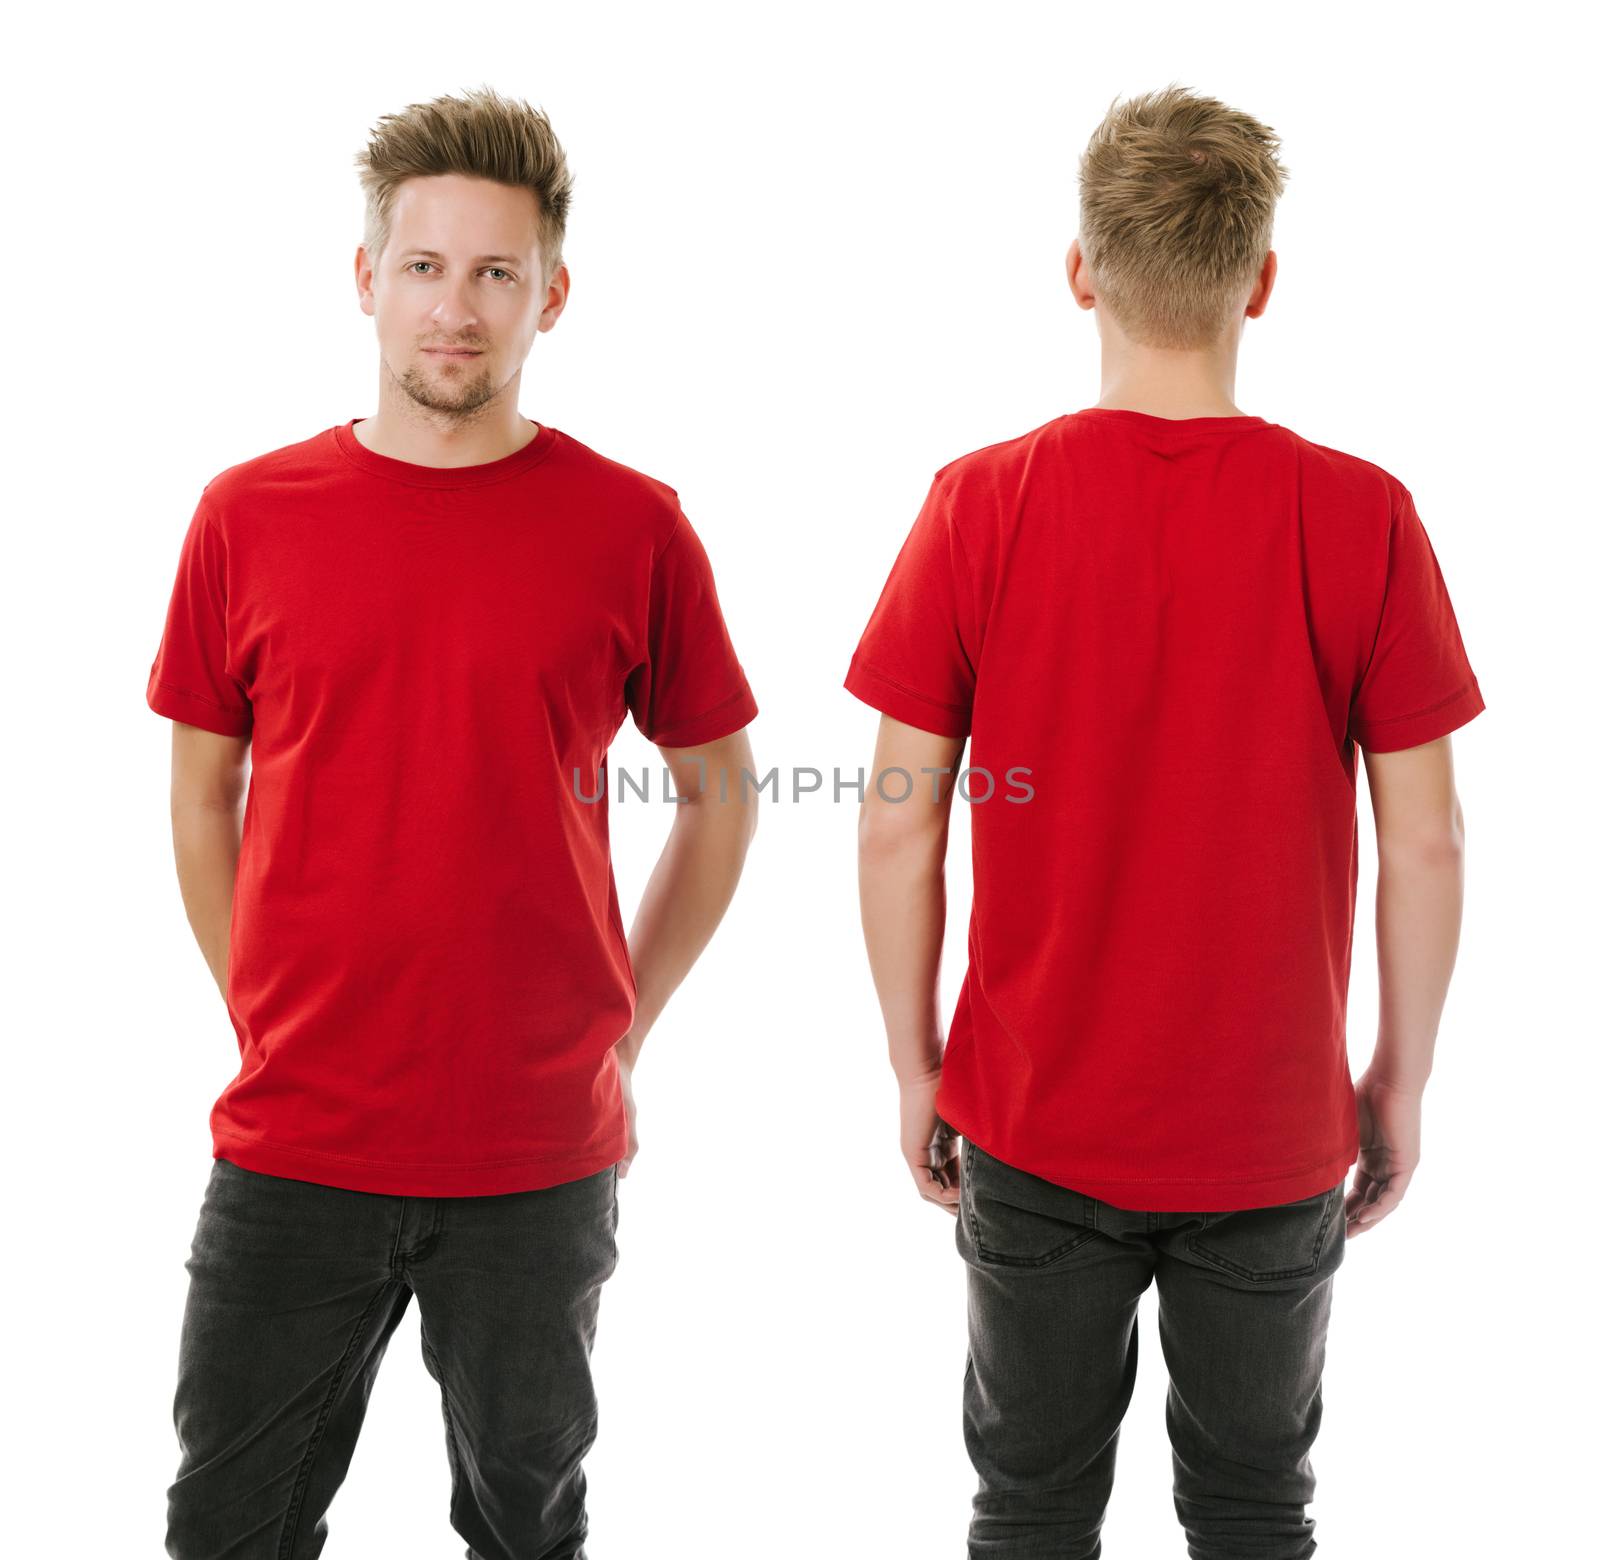 Man posing with blank red shirt by sumners